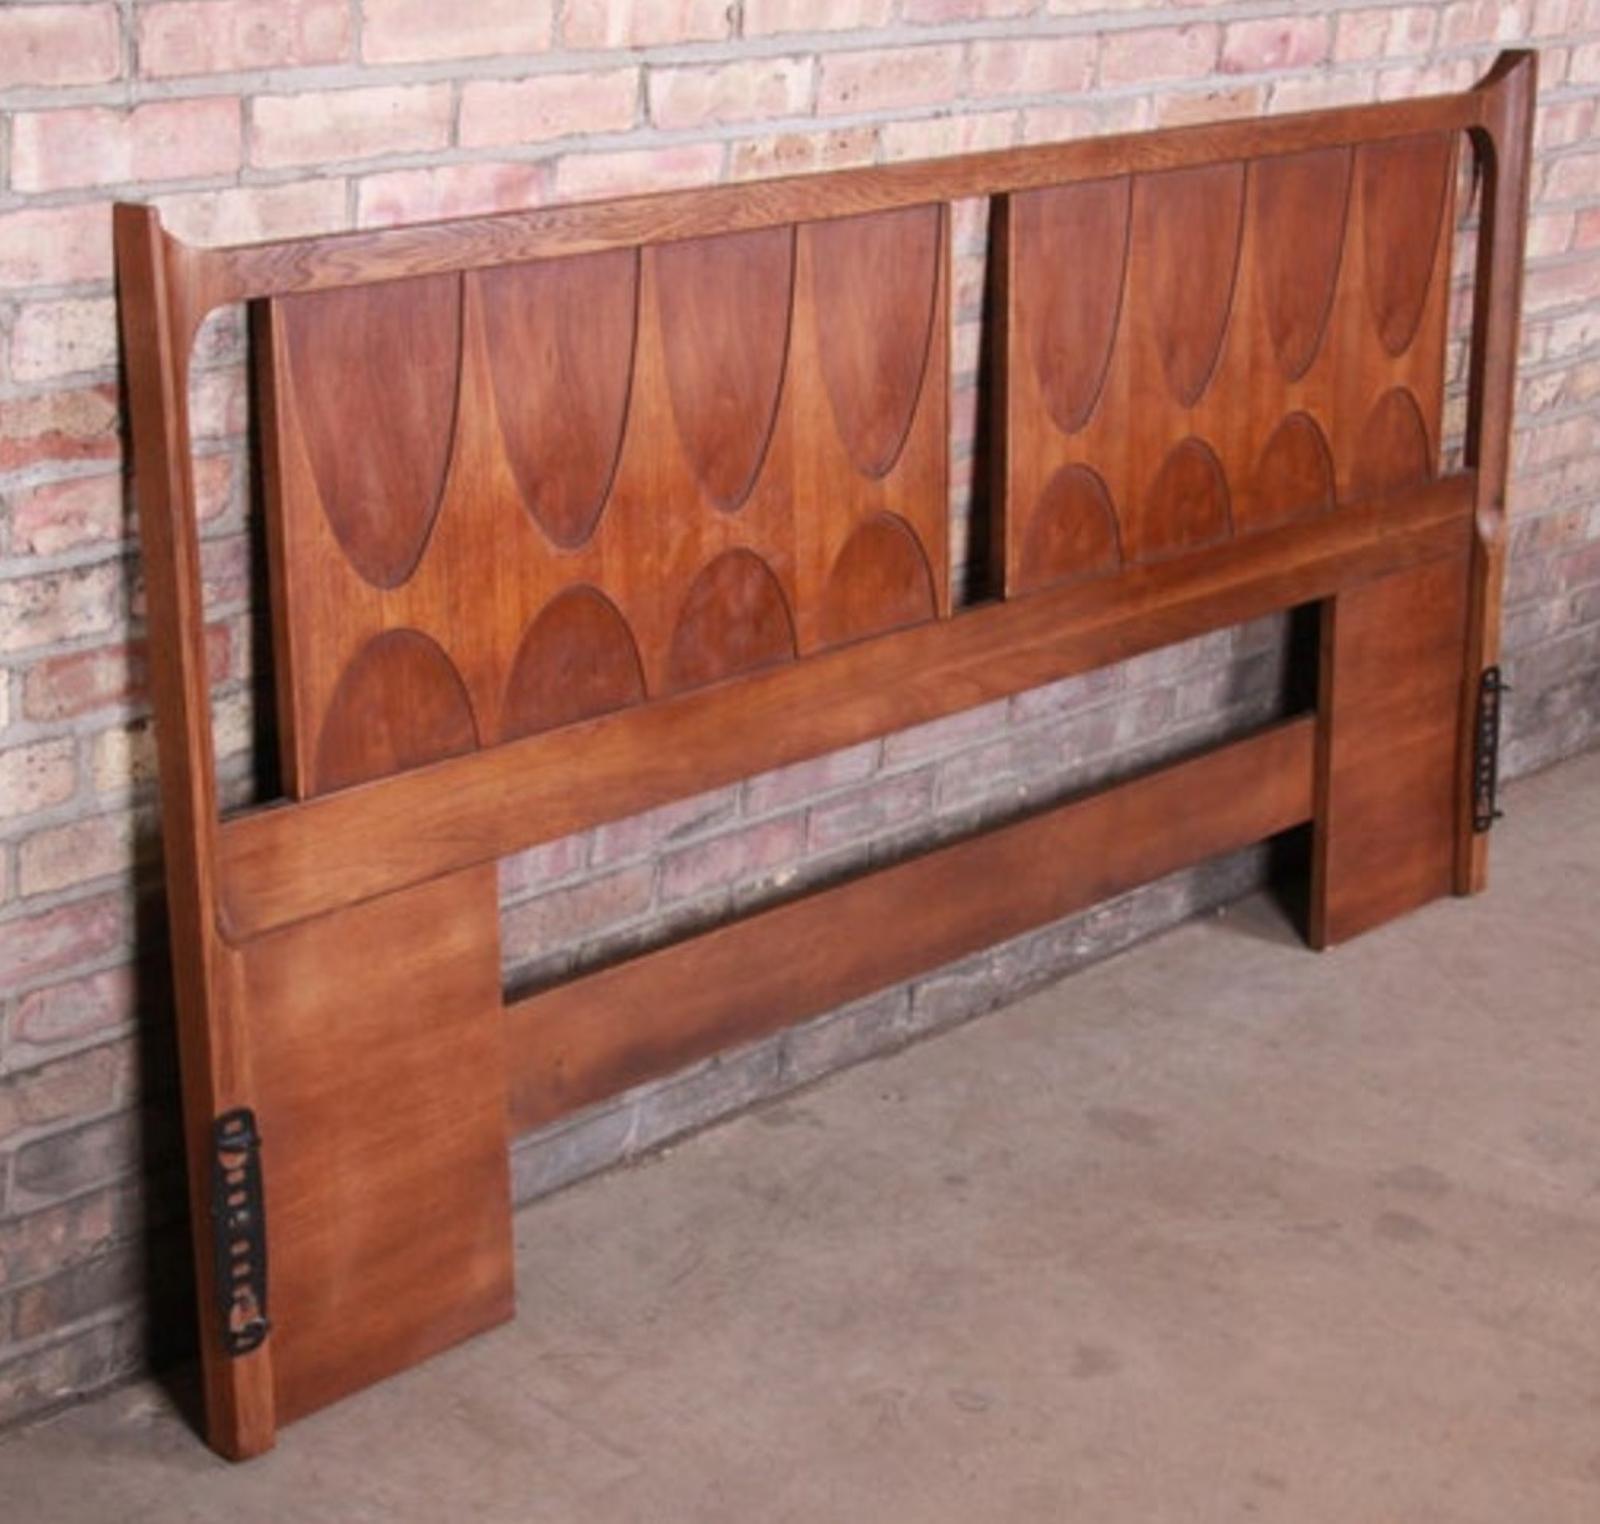 This fantastic headboard was built in the 1970s by high-end manufacturer Broyhill for their Brasilia line of furntiure. Since then, the Brasilia line has become more desirable, and original sets are difficult to come by. Featuring walnut